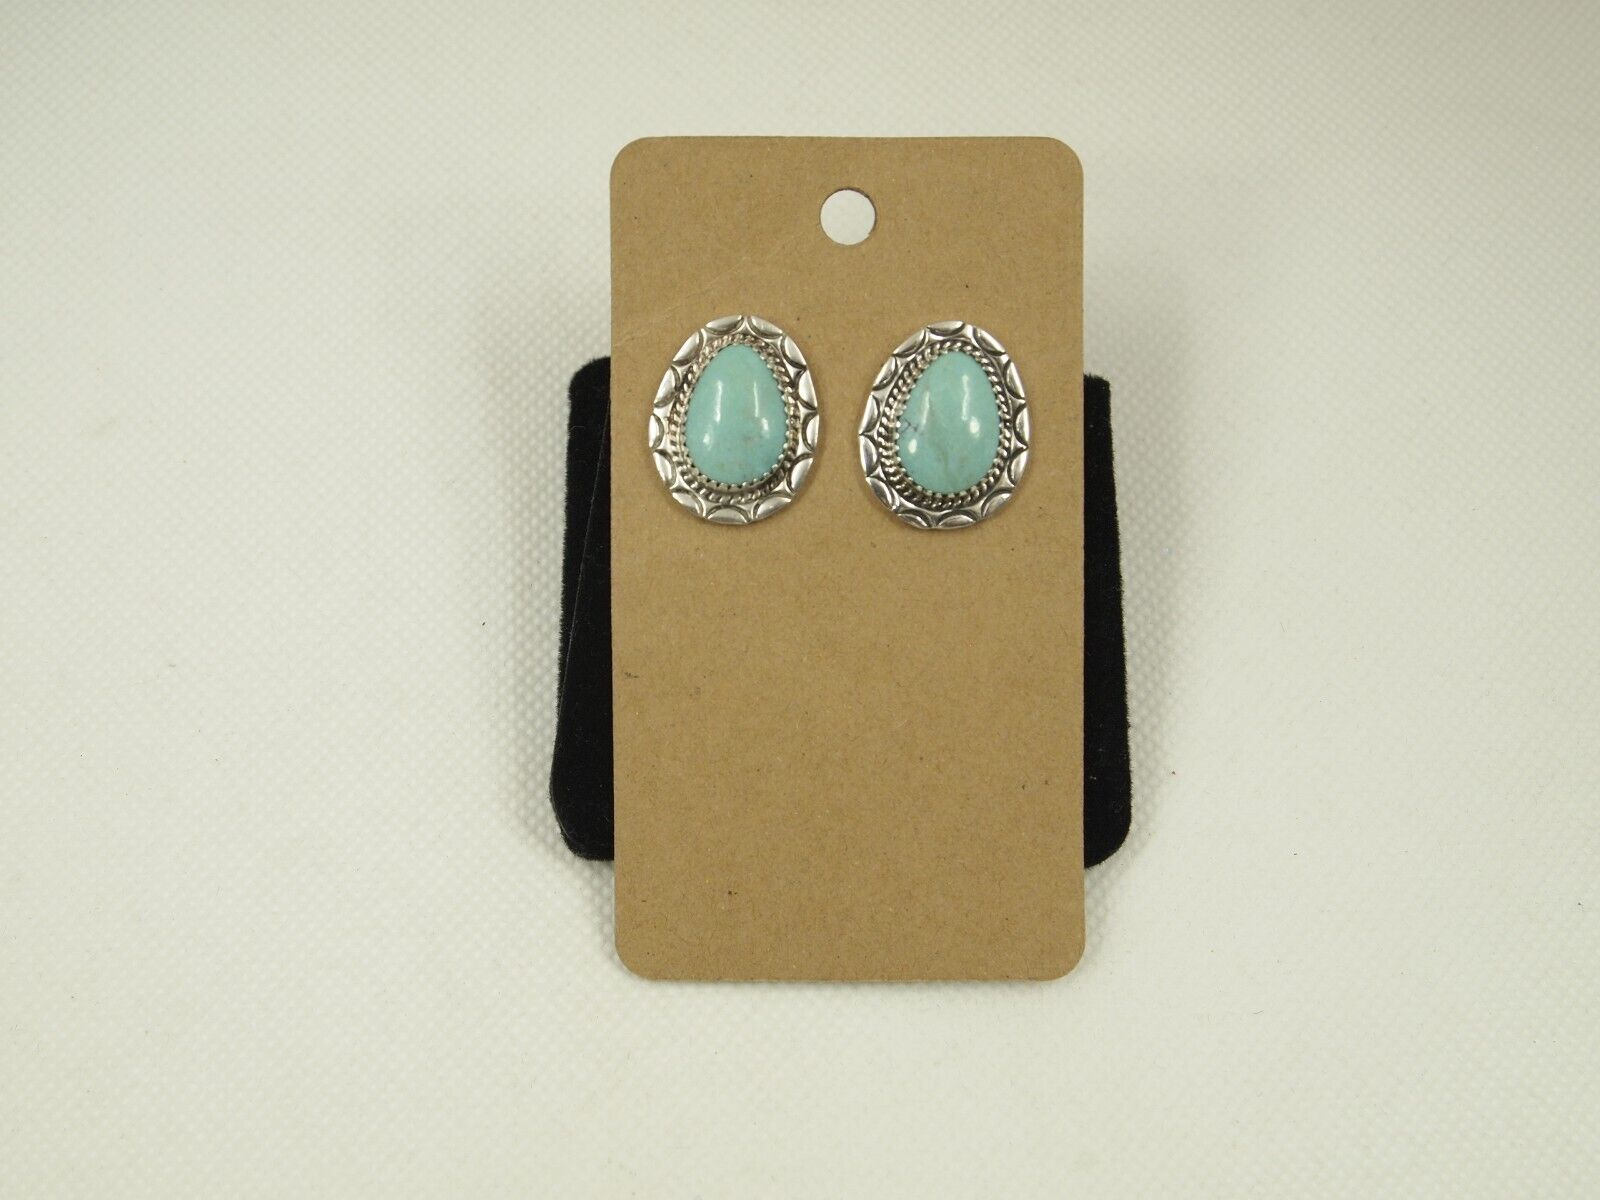 Navajo Benny Pinto BP Sterling Silver 925 & Turquoise Earrings